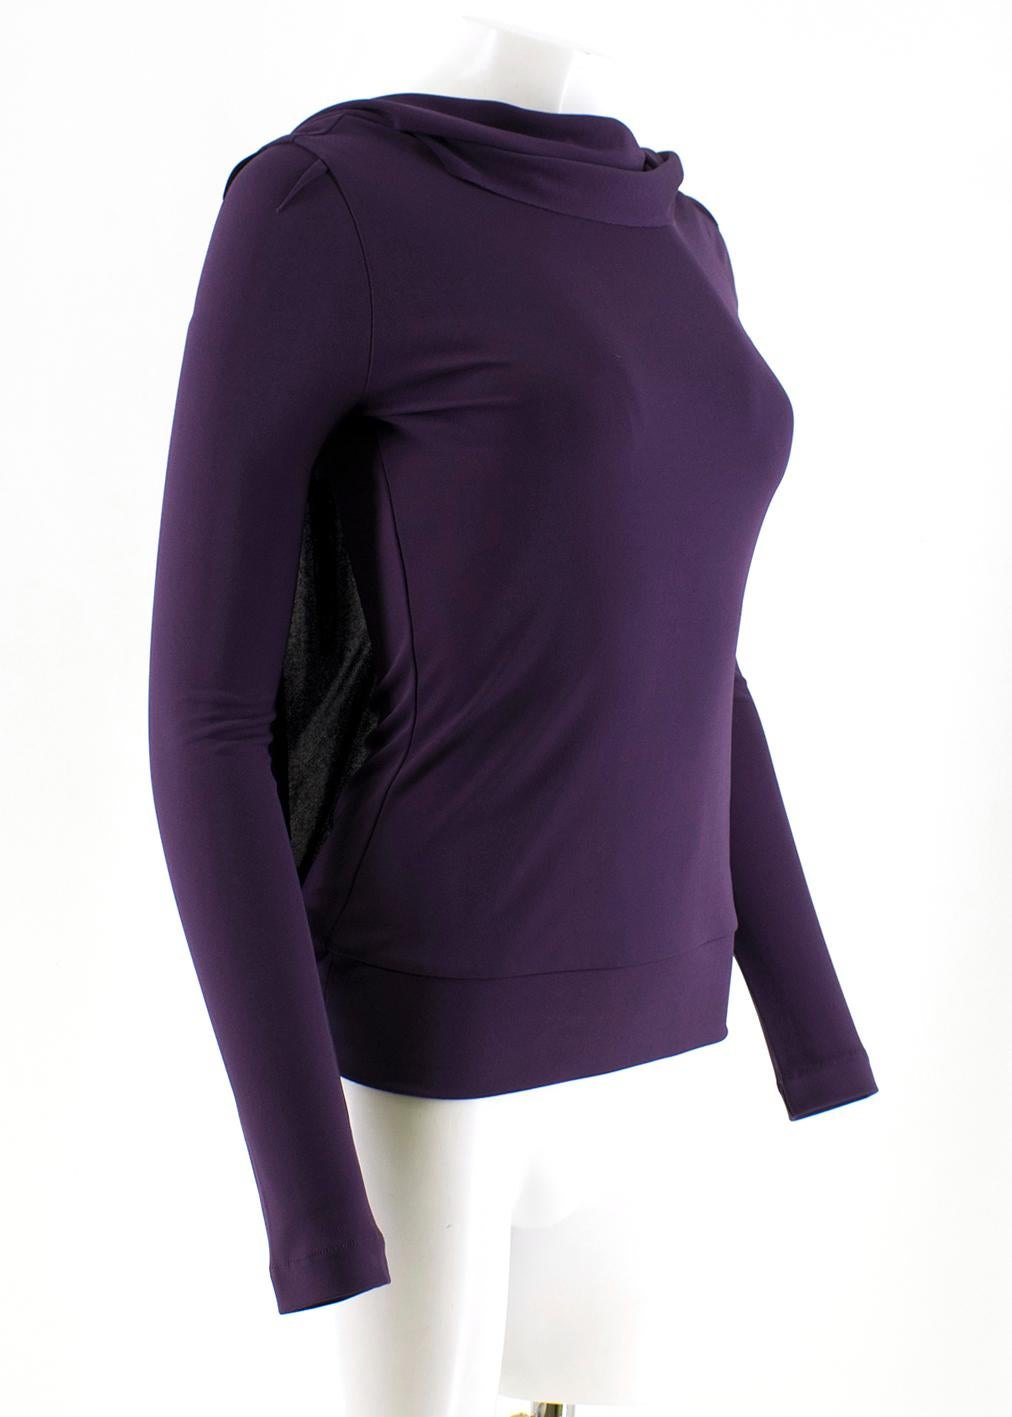 Roland Mouret New Season Purple Layered Blouse

- Purple, mid-weight, layered blouse
- Long sleeves
- V-back
- Loose fit
- Ruching around cuffs and towards the hem 
- 65% viscose and 35% polyester

Please note, these items are pre-owned and may show